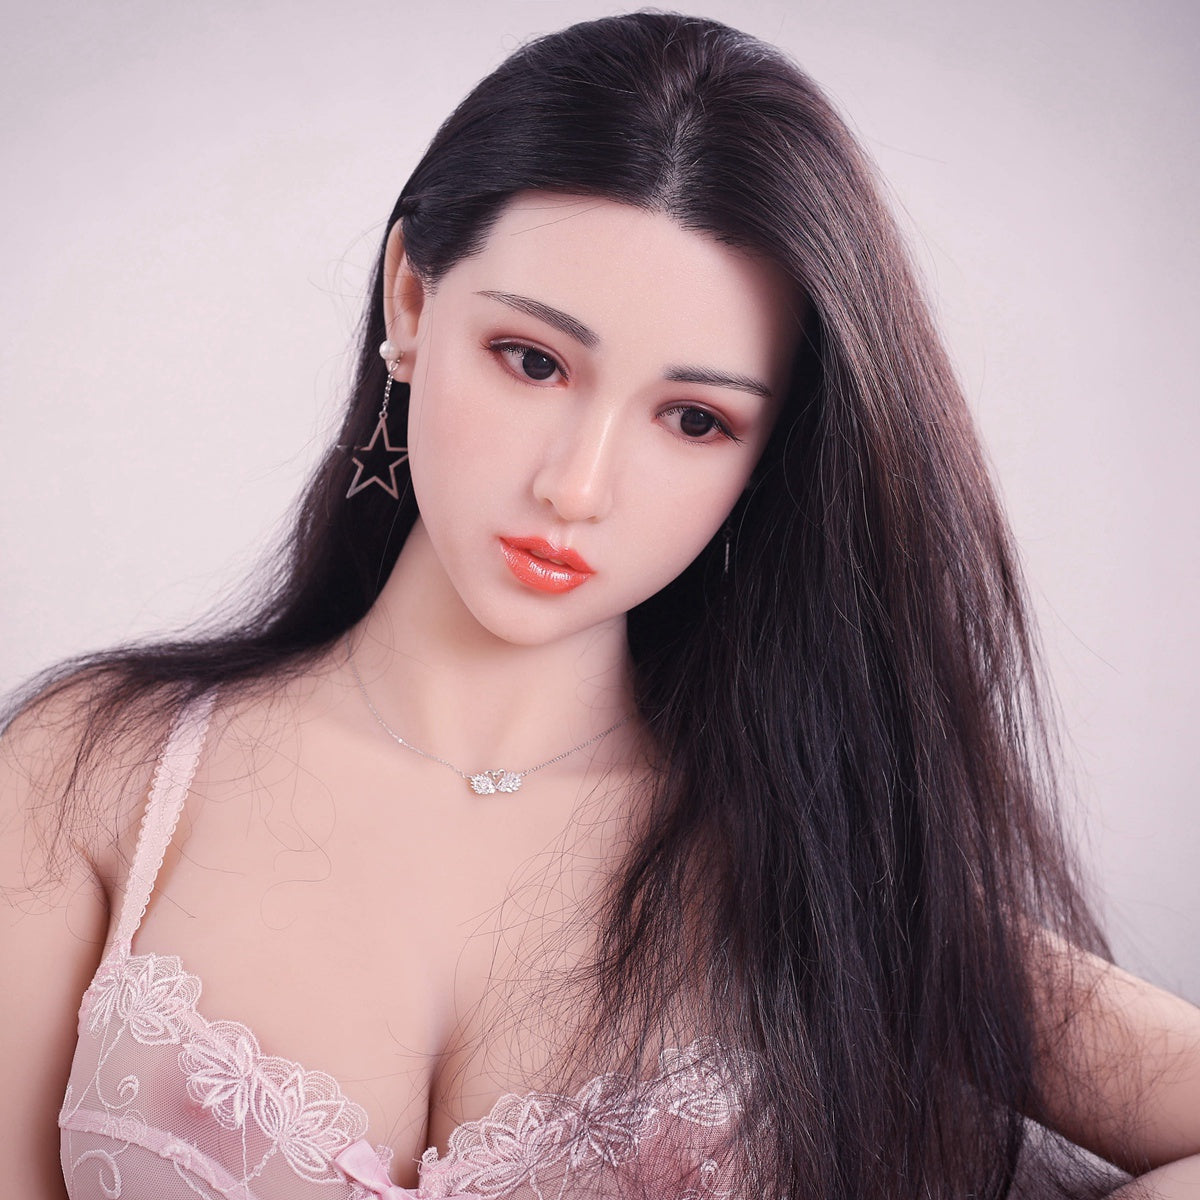 161cm Chubby Chinese Sex Doll - Cleo AF Doll